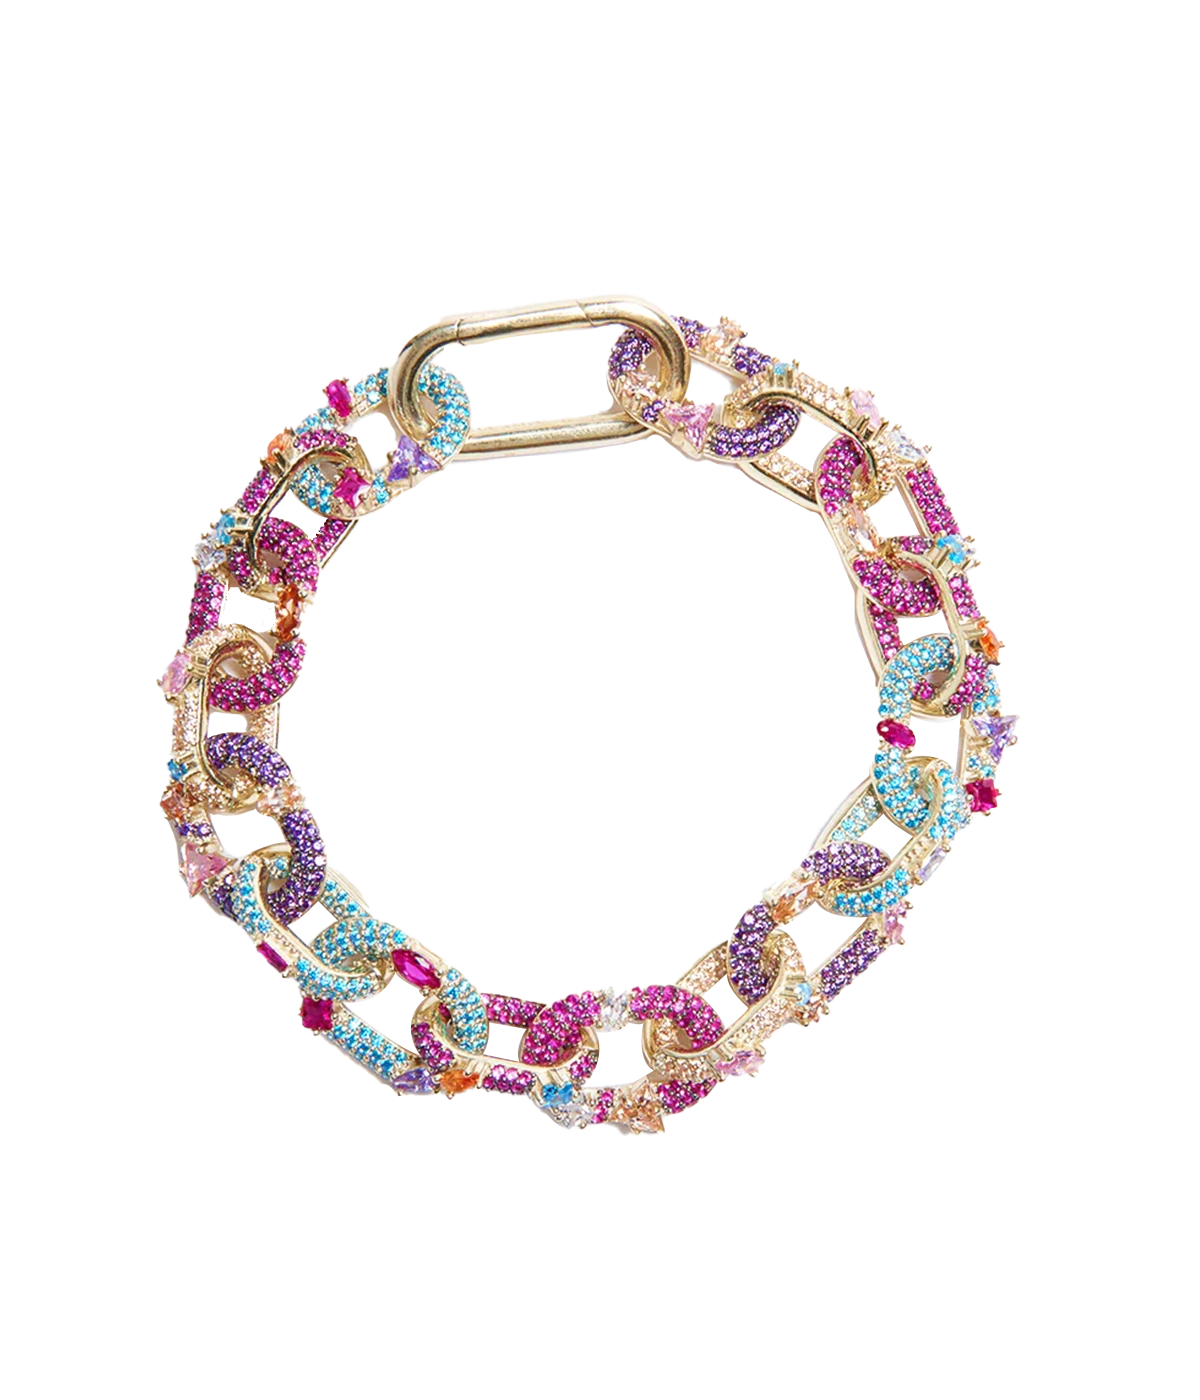 A statement link inspired chunky bracelet, made from encrusted stones in pink, blue & purple all in yellow gold. Night out, date night, comfrotable, special occasion, made internationally, statement. 